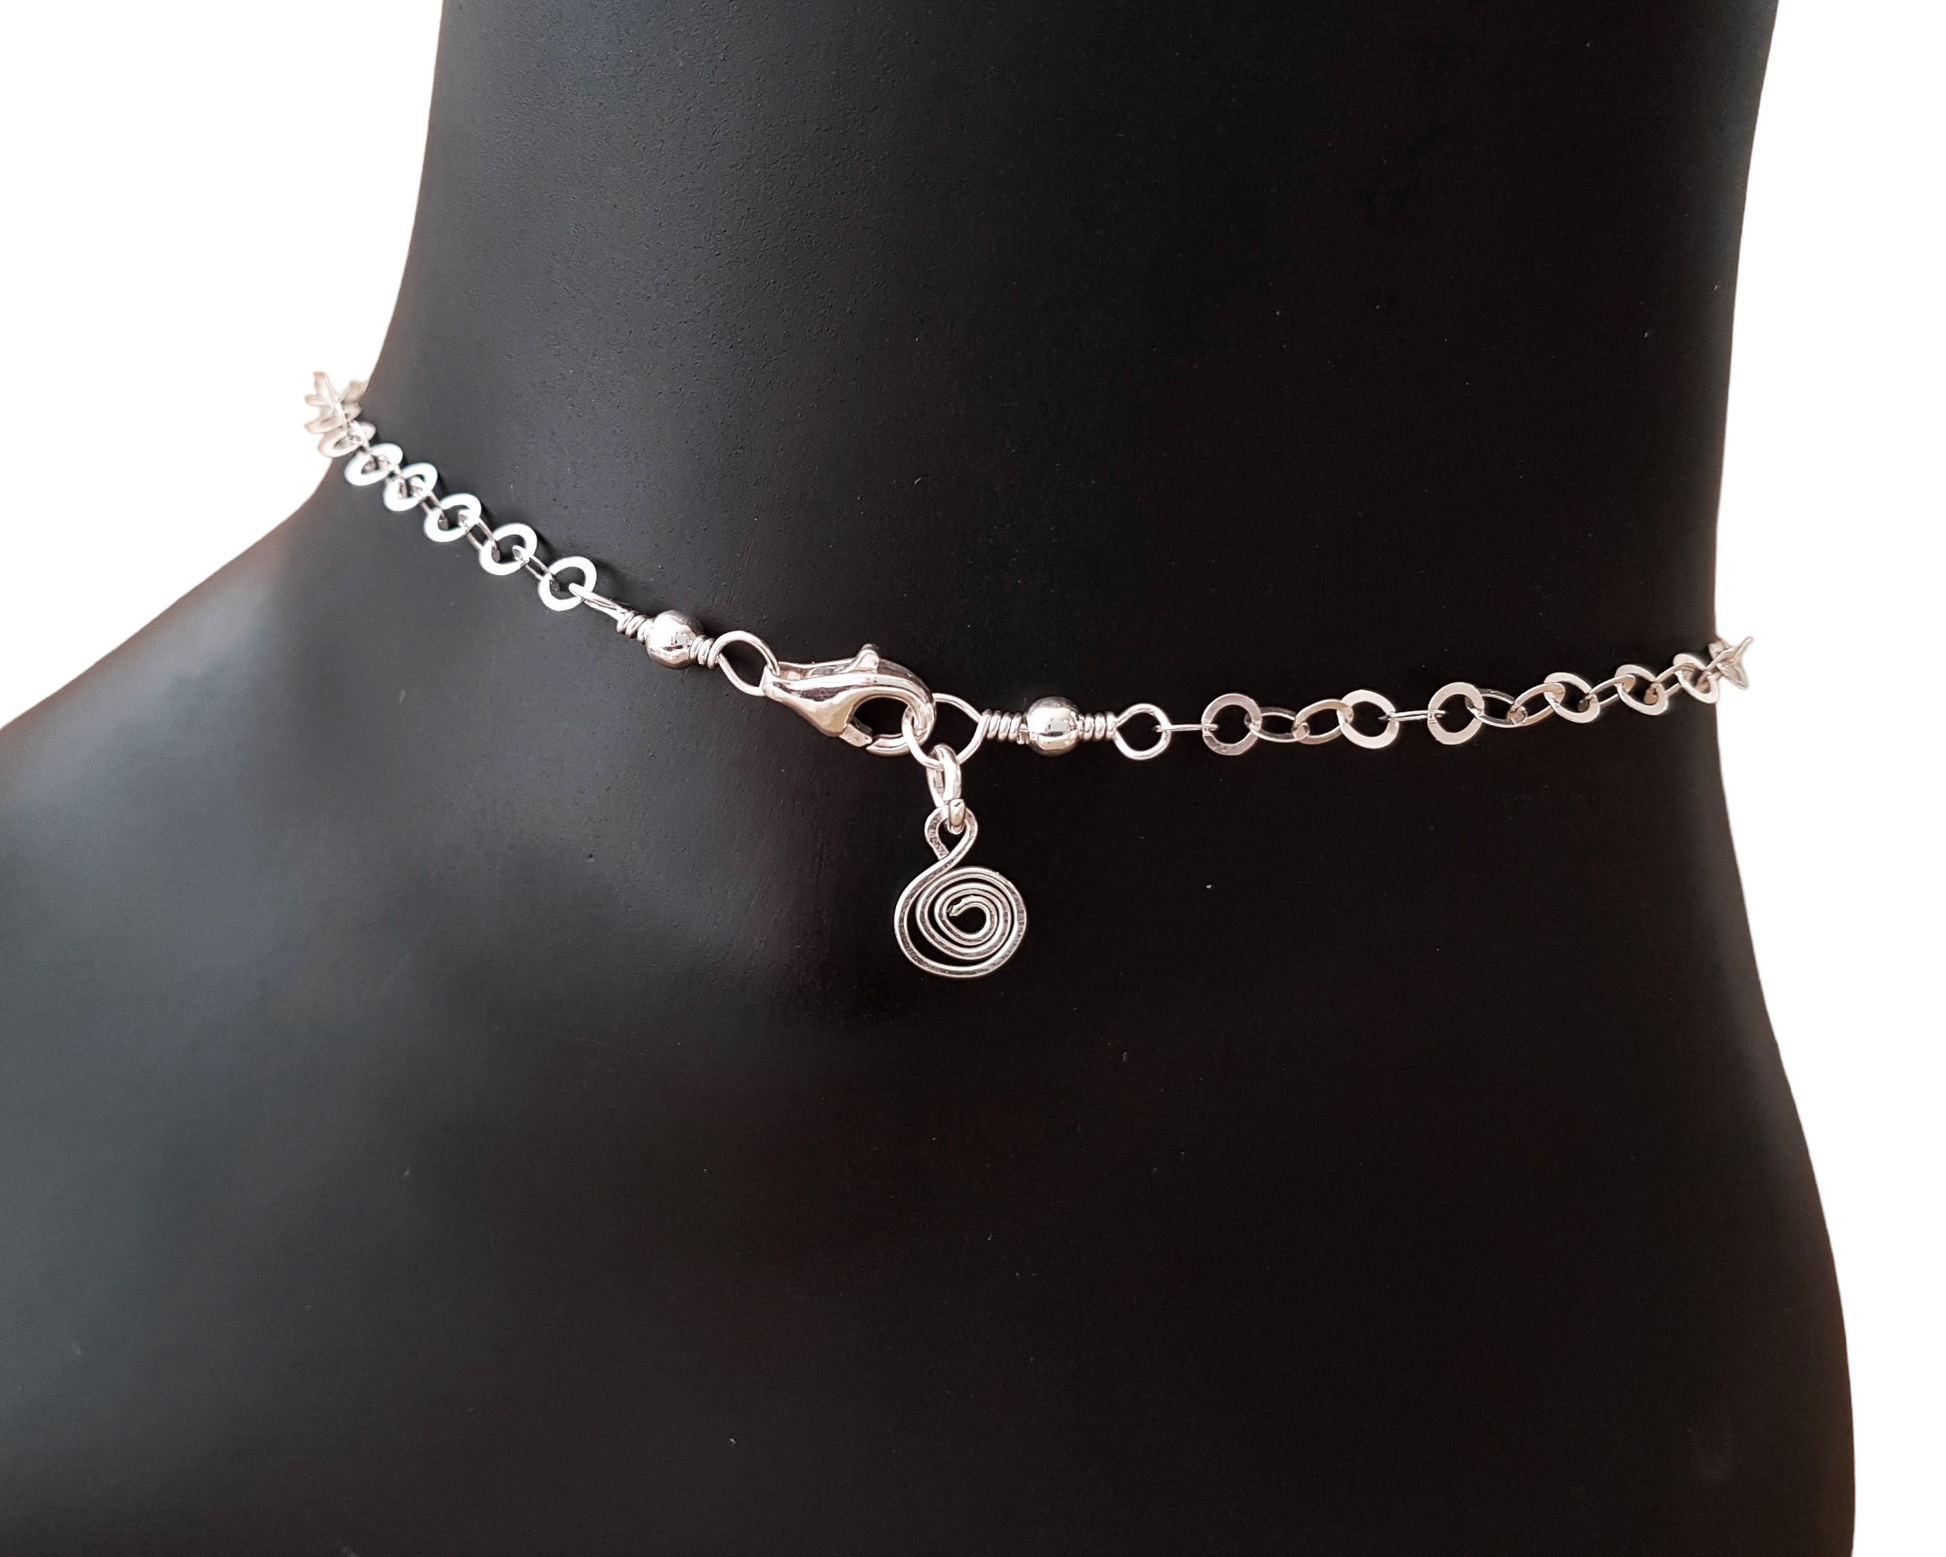 Eternity Coil Pendant on end of anklet